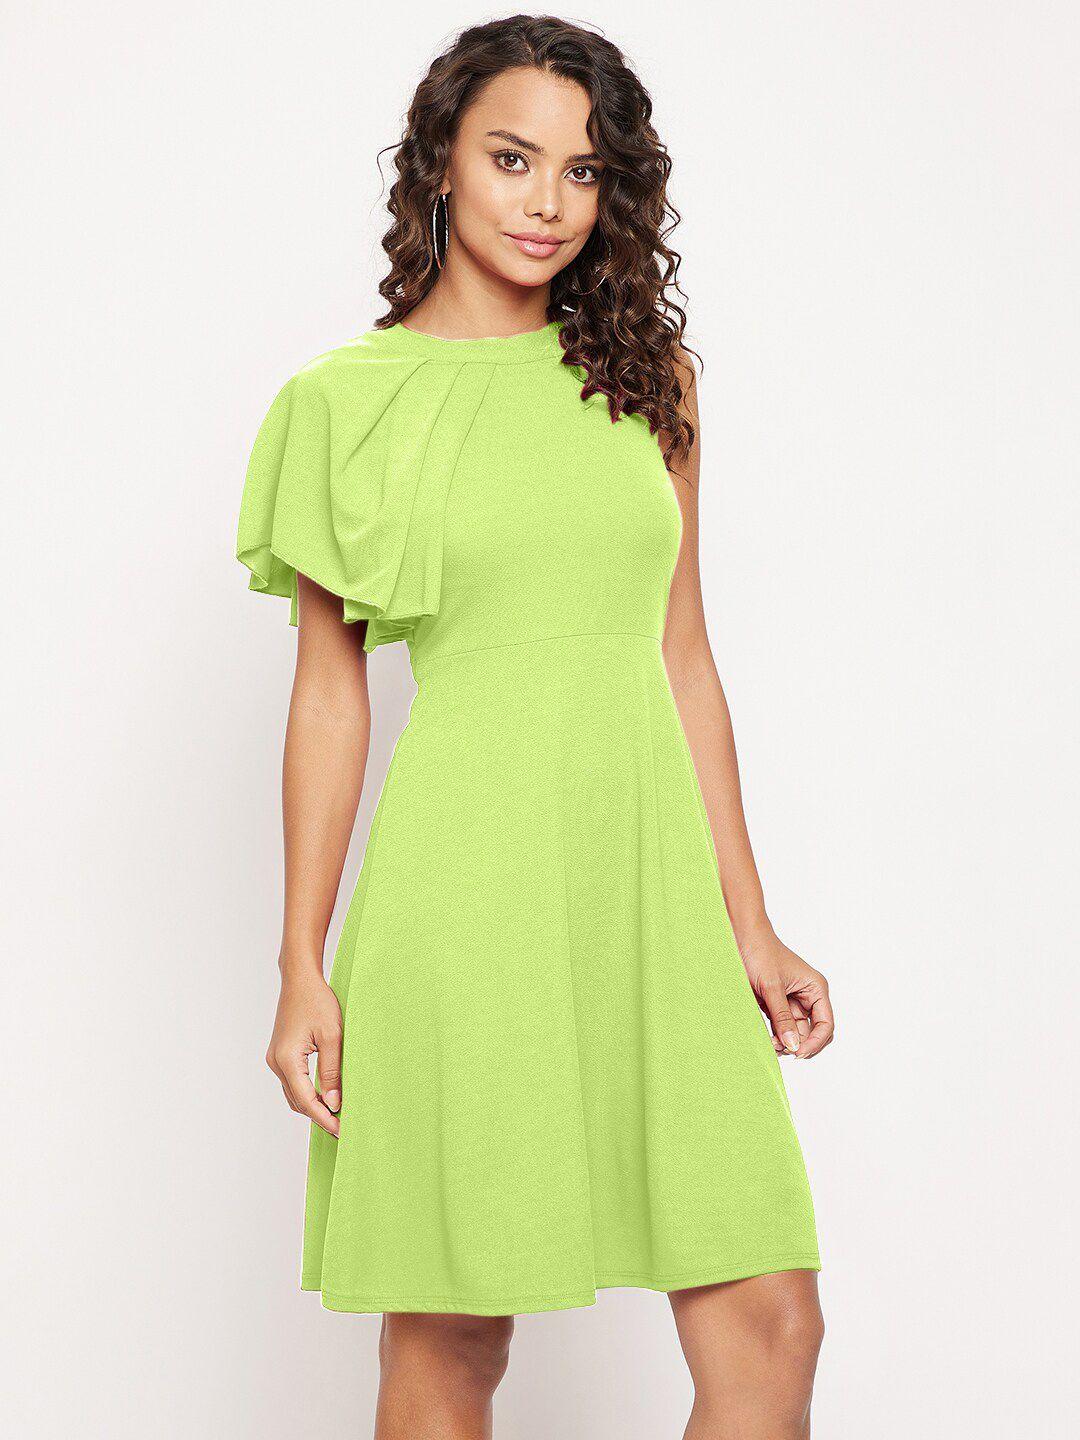 uptownie lite stretchable high neck fit & flare skater dress